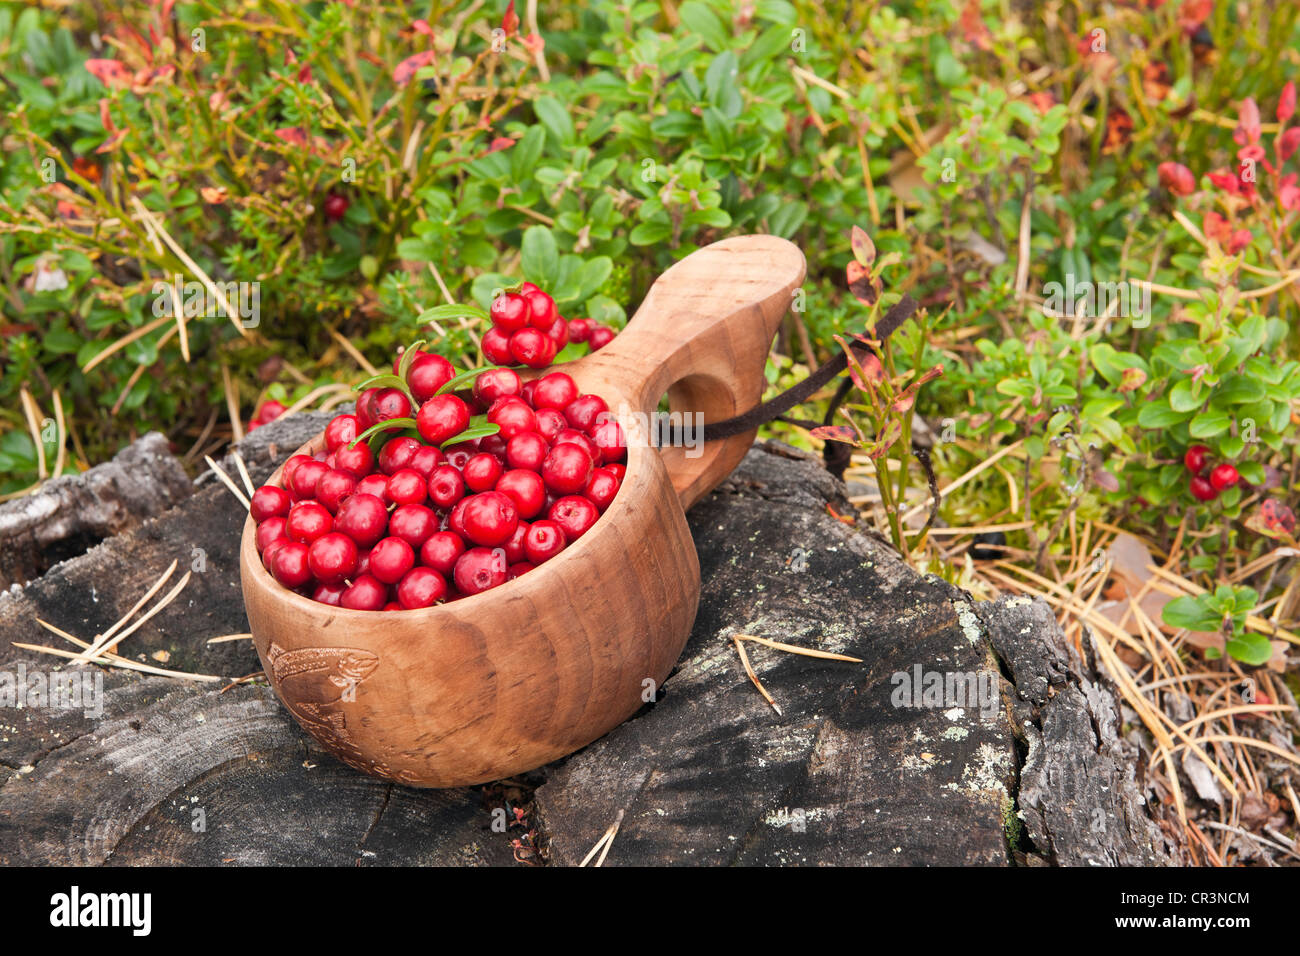 Freshly picked cranberries in a small wooden bowl, Norway, Scandinavia, Europe Stock Photo